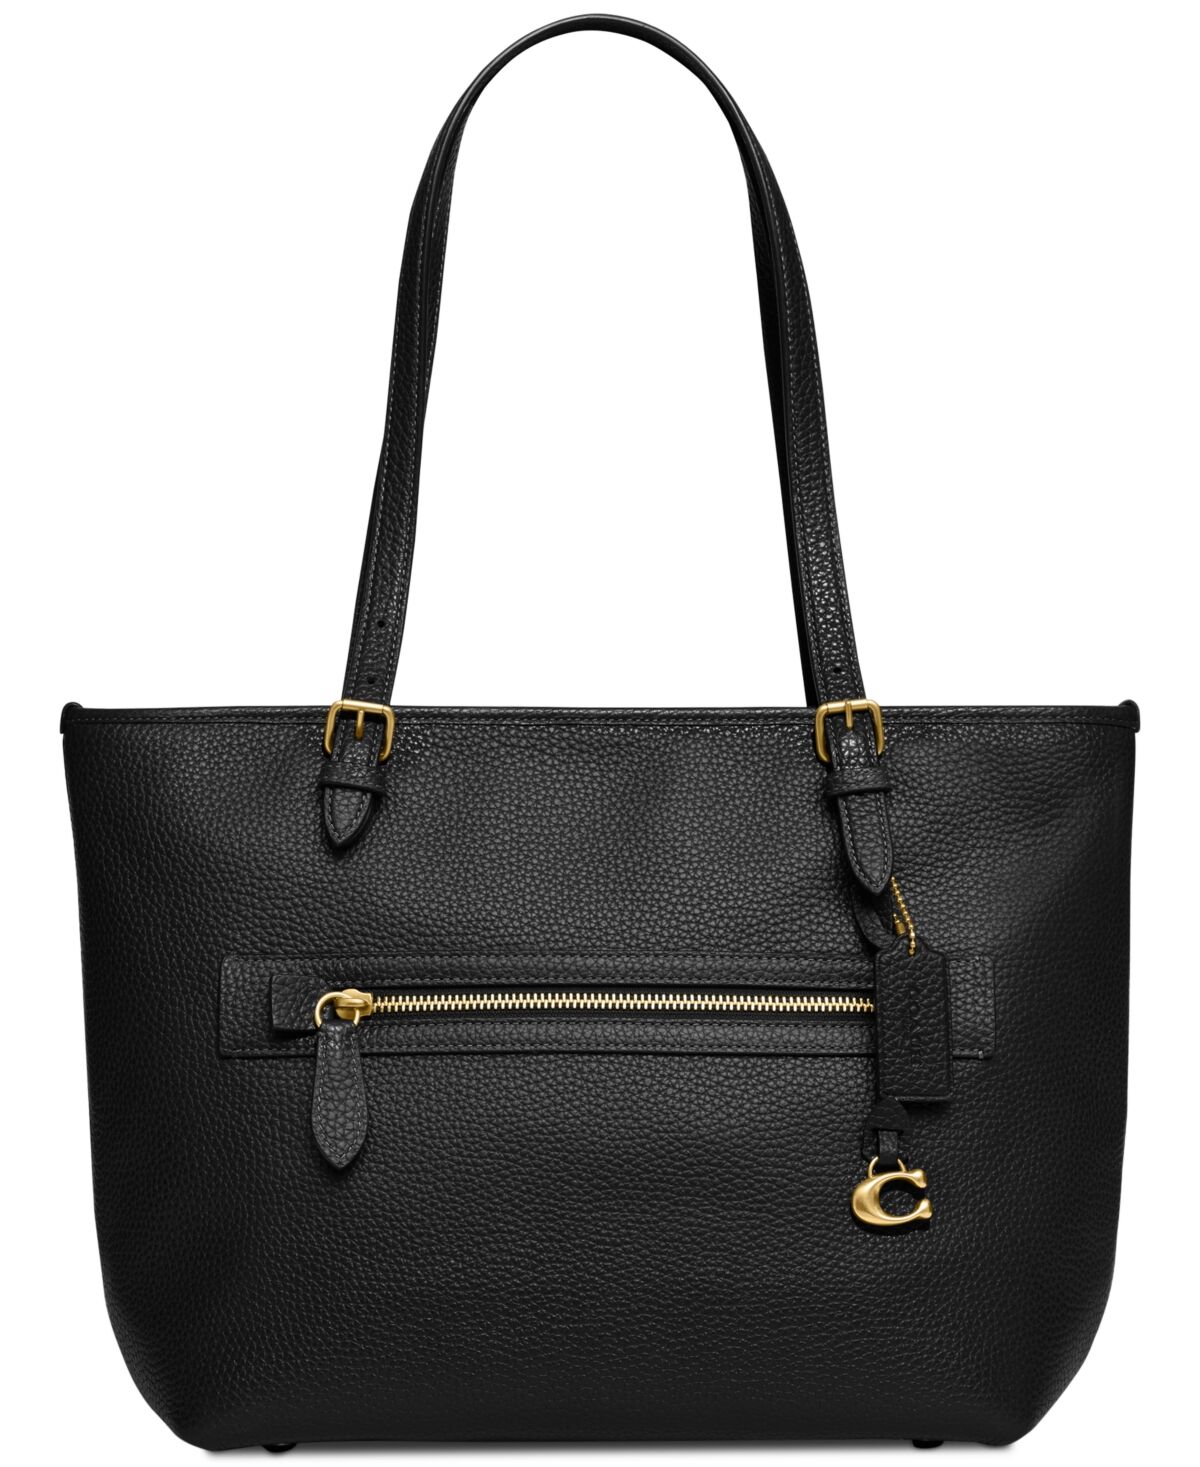 Coach Polished Pebble Leather Taylor Tote with C Dangle Charm - Black